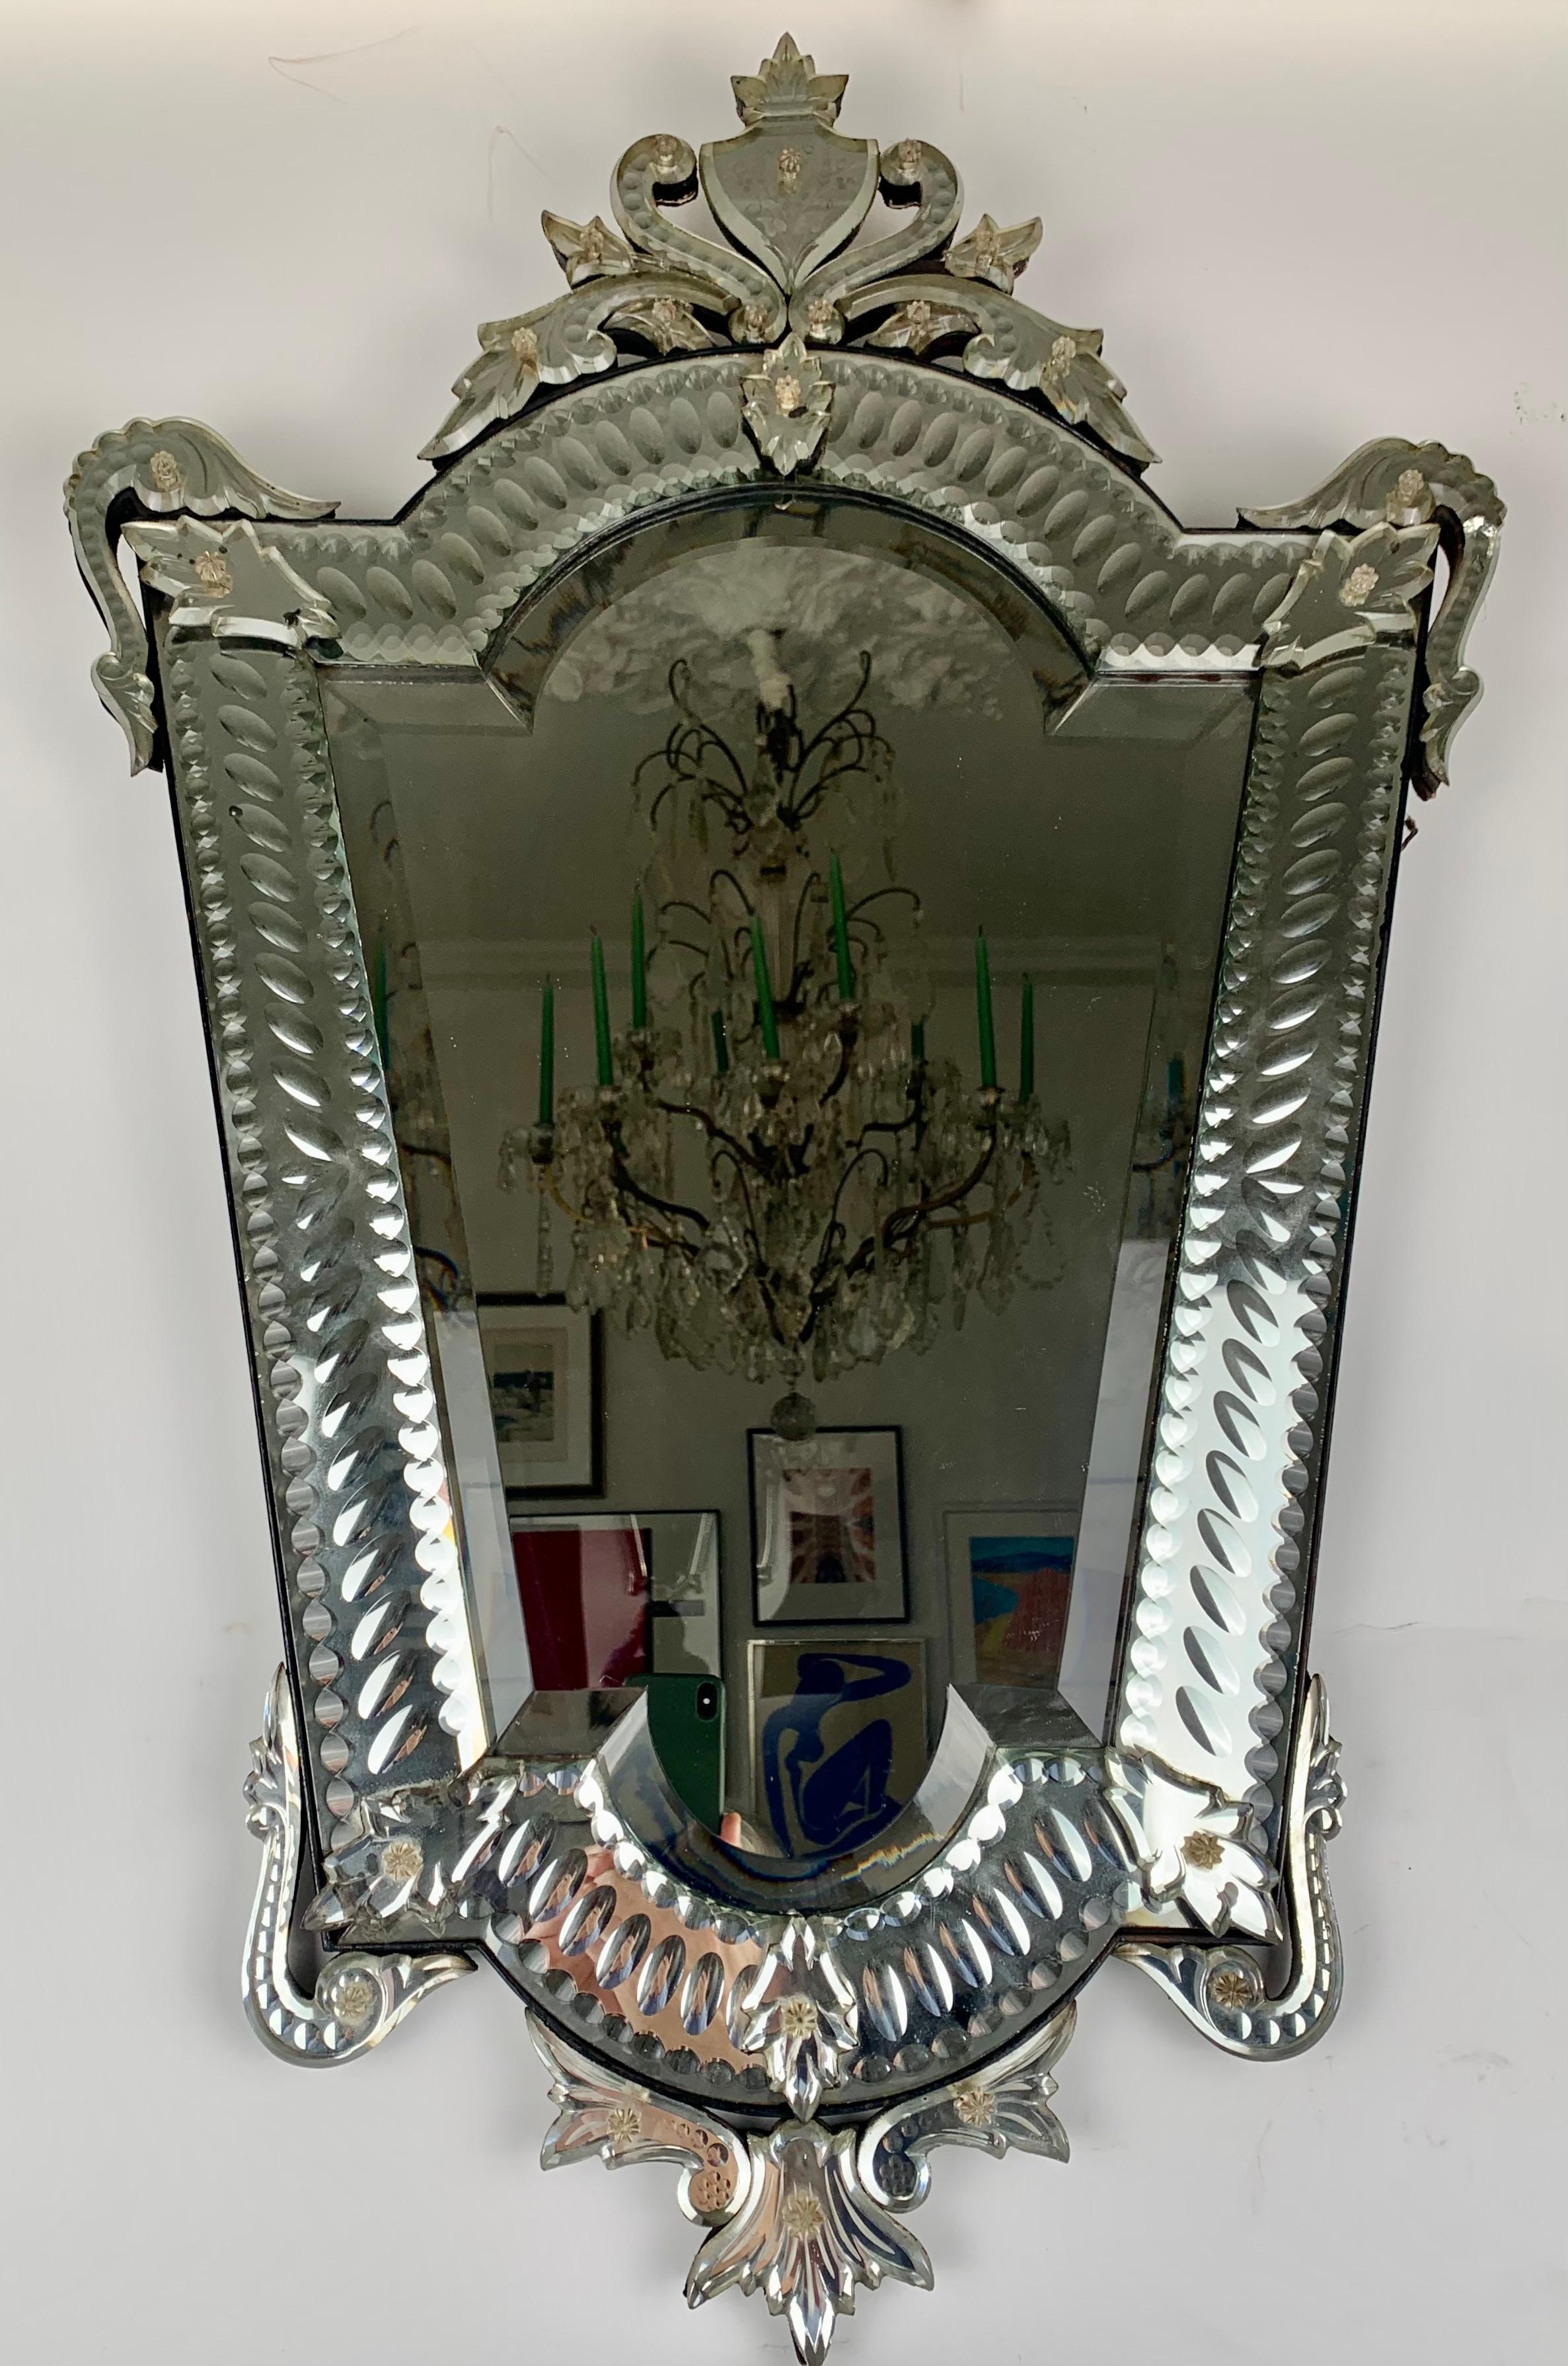 Venetian mirror in a trapeze shape with floral motifs.
Italy, circa 1930.